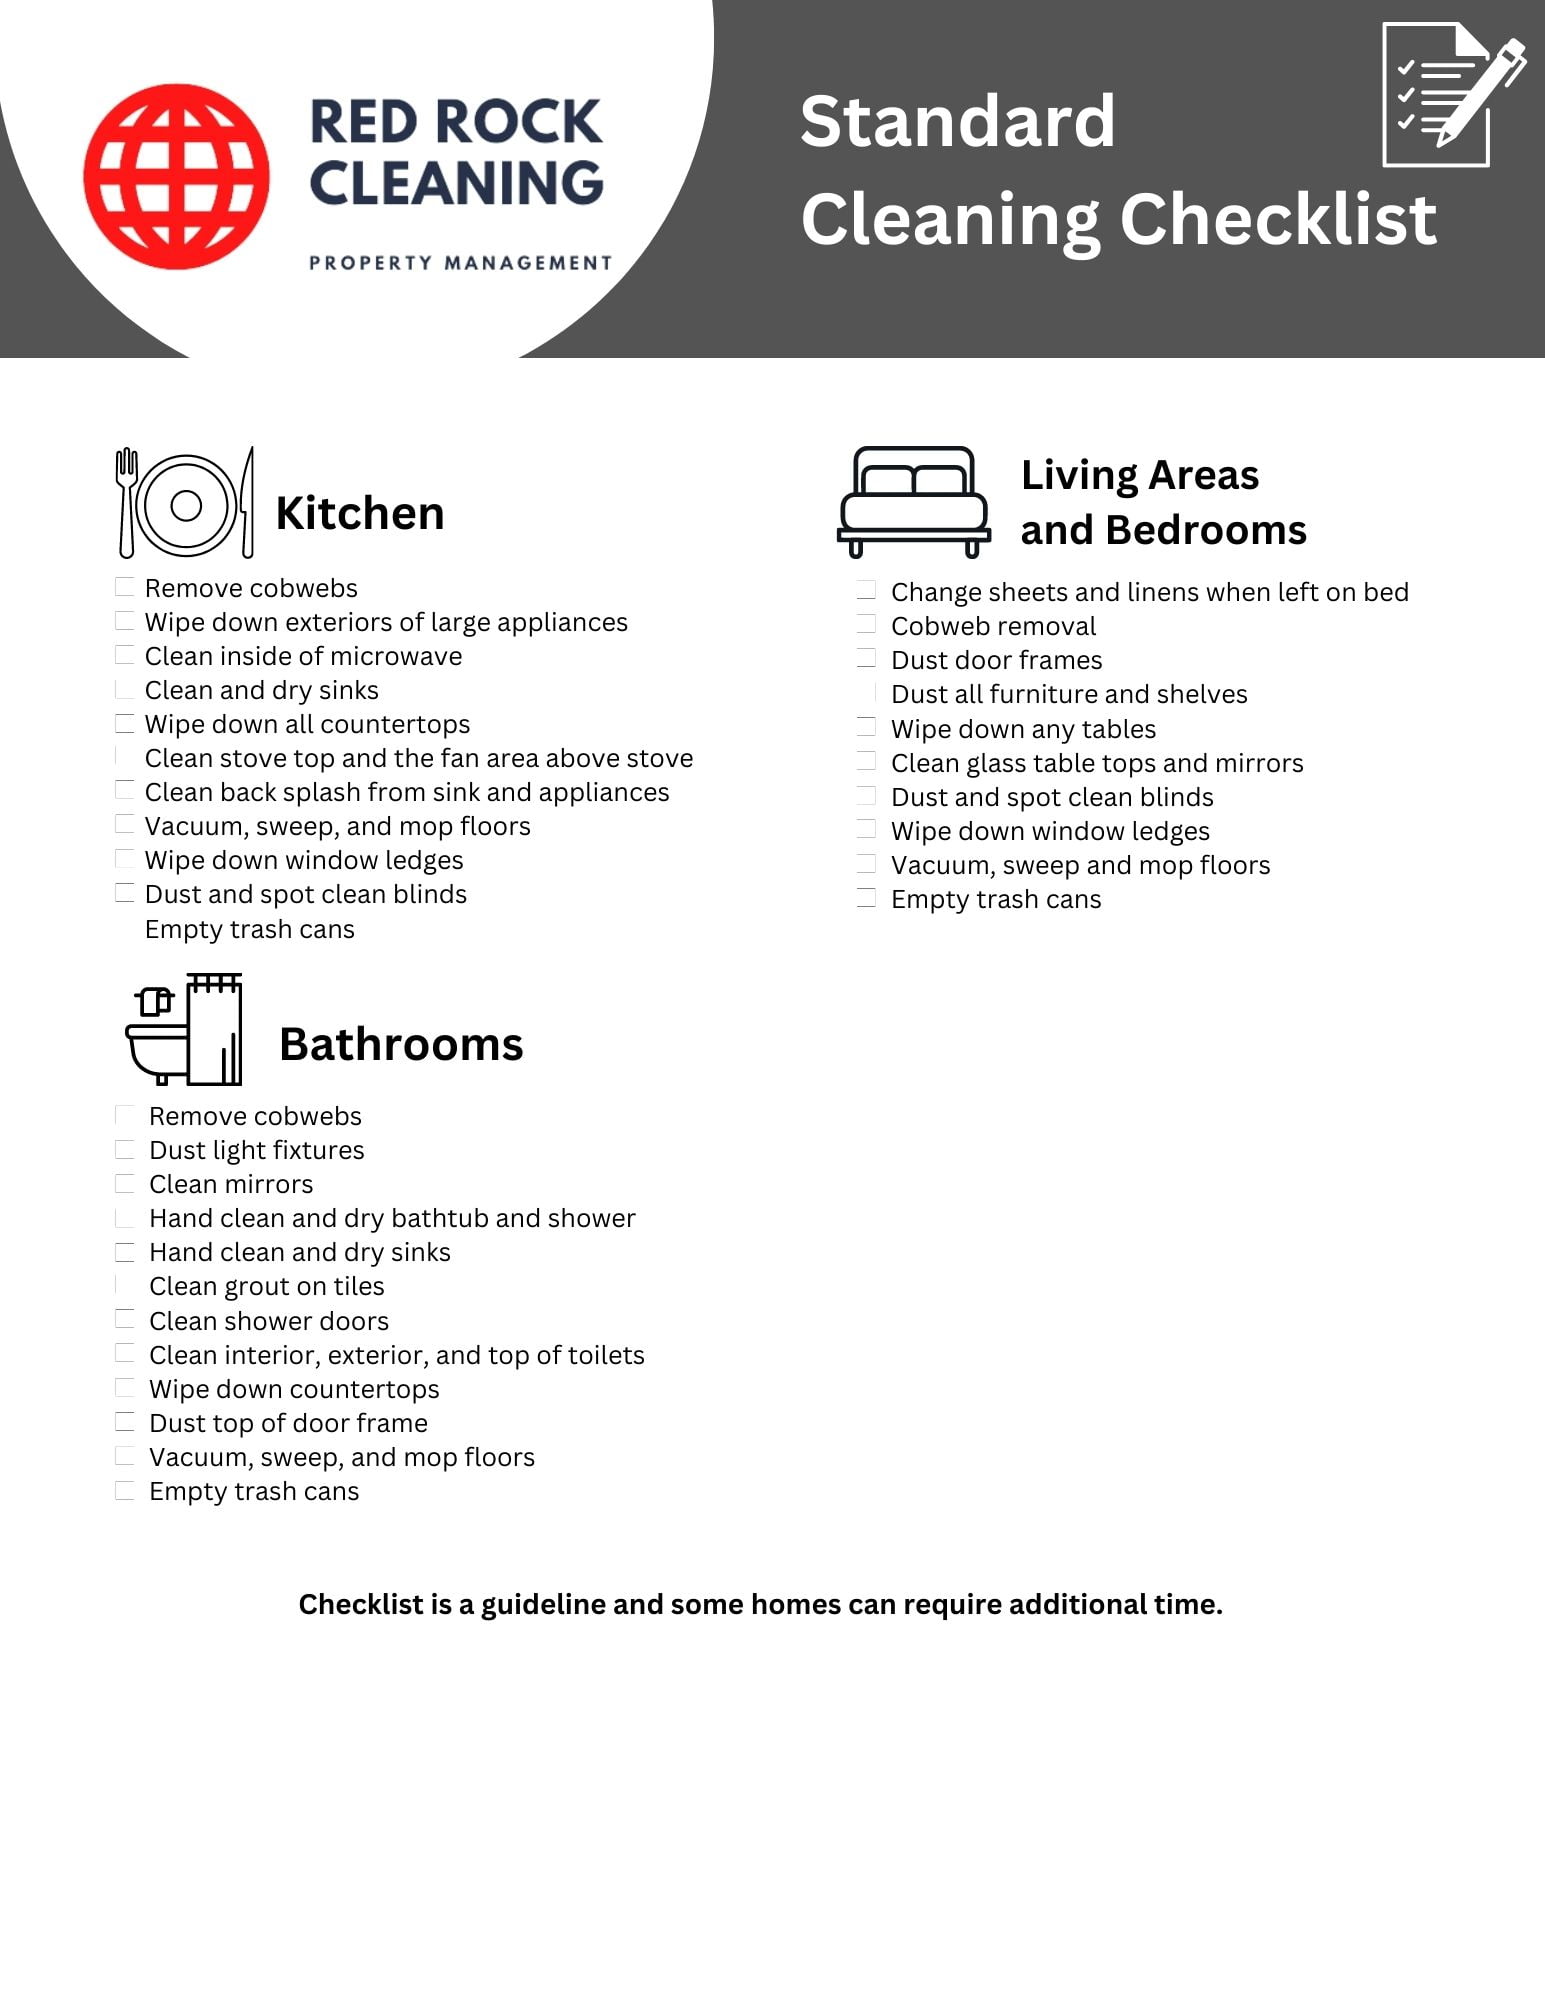 Red Rock Cleaning Standard Checklist